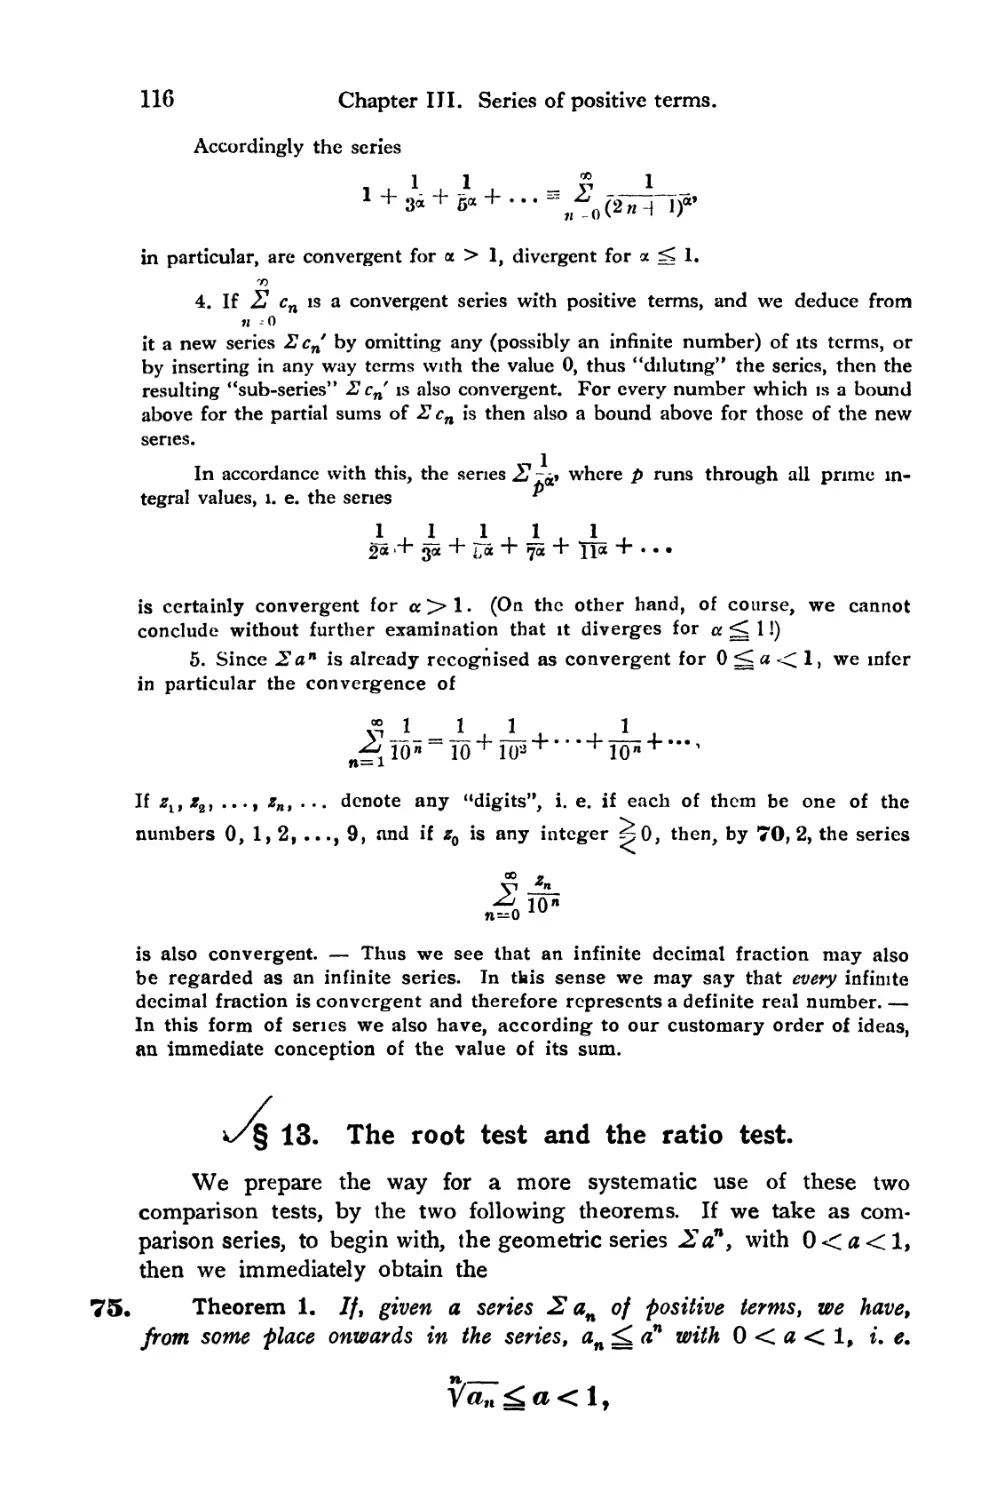 § 13. The root test and the ratio test